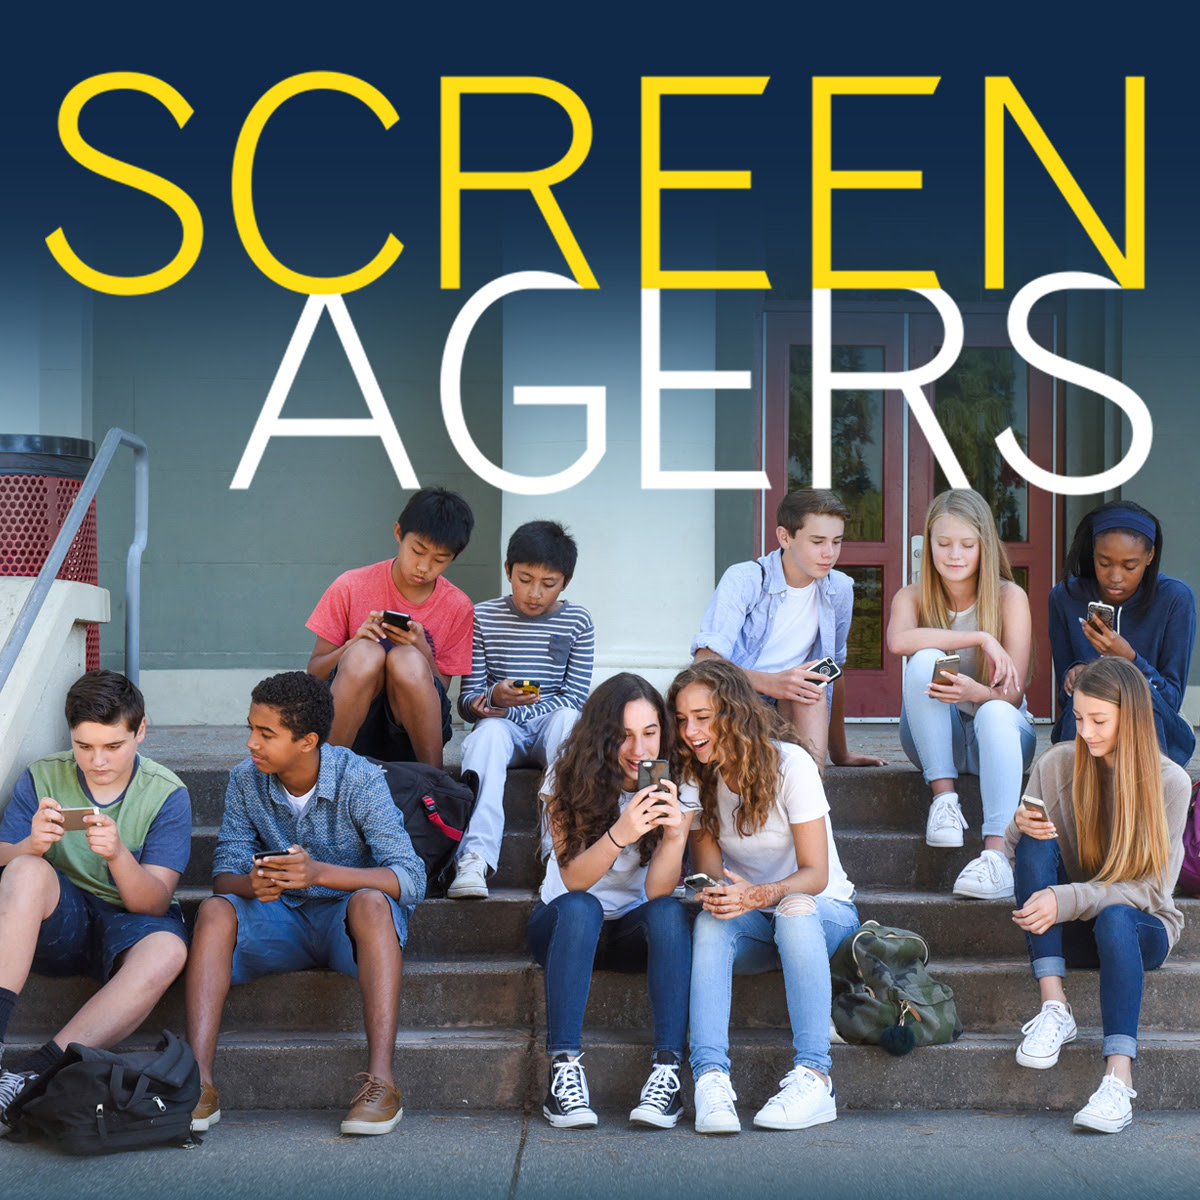 Screenagers Film Presented By Hillcrest Middle School